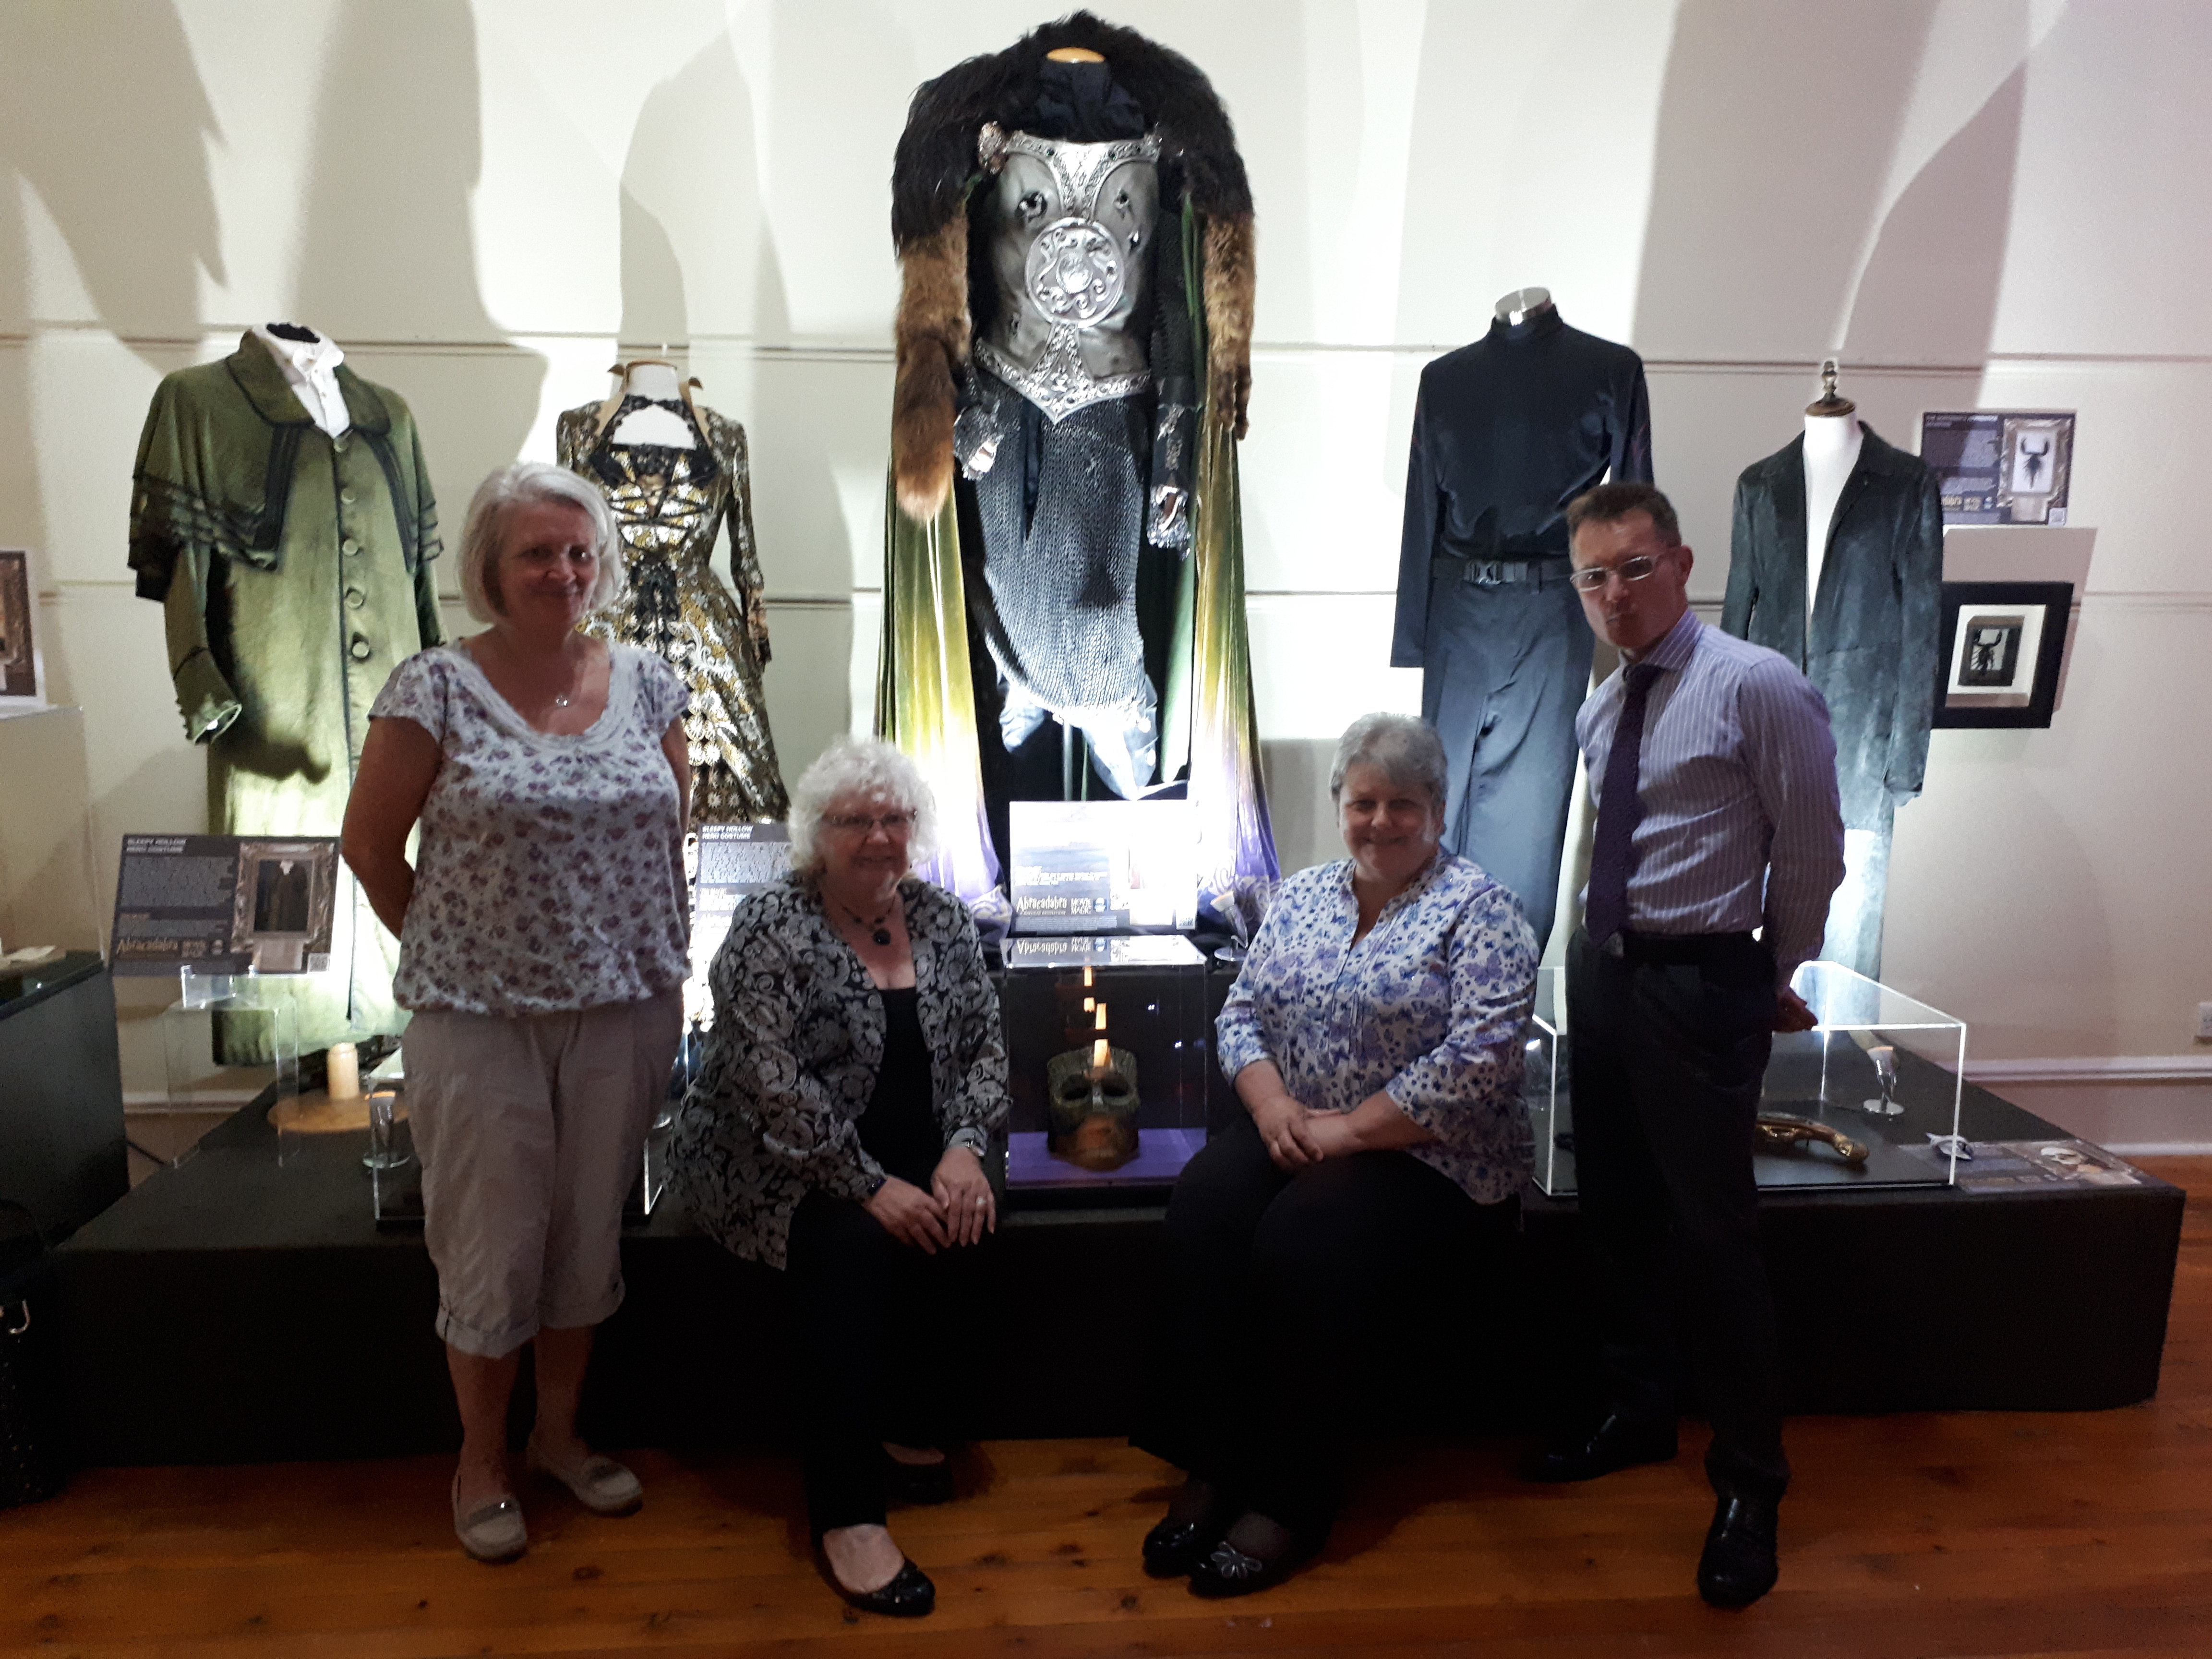 Pictured from left to right: councillors Lesley Berry, Anne Simpson, Anne Stirling and service manager for cultural services Craig Elliot with costumes from various magical movies